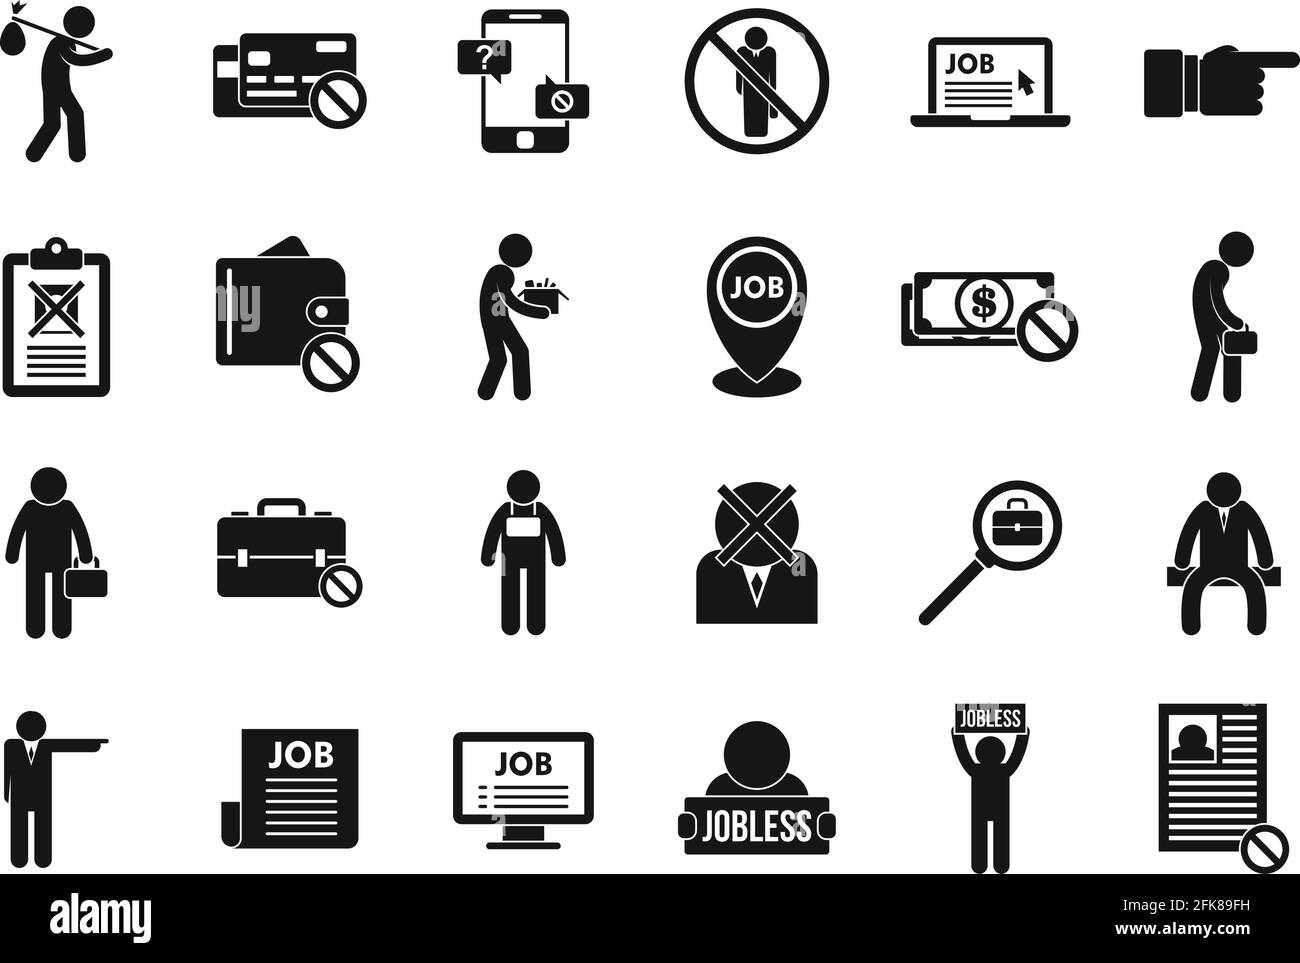 Jobless icons set, simple style Stock Vector